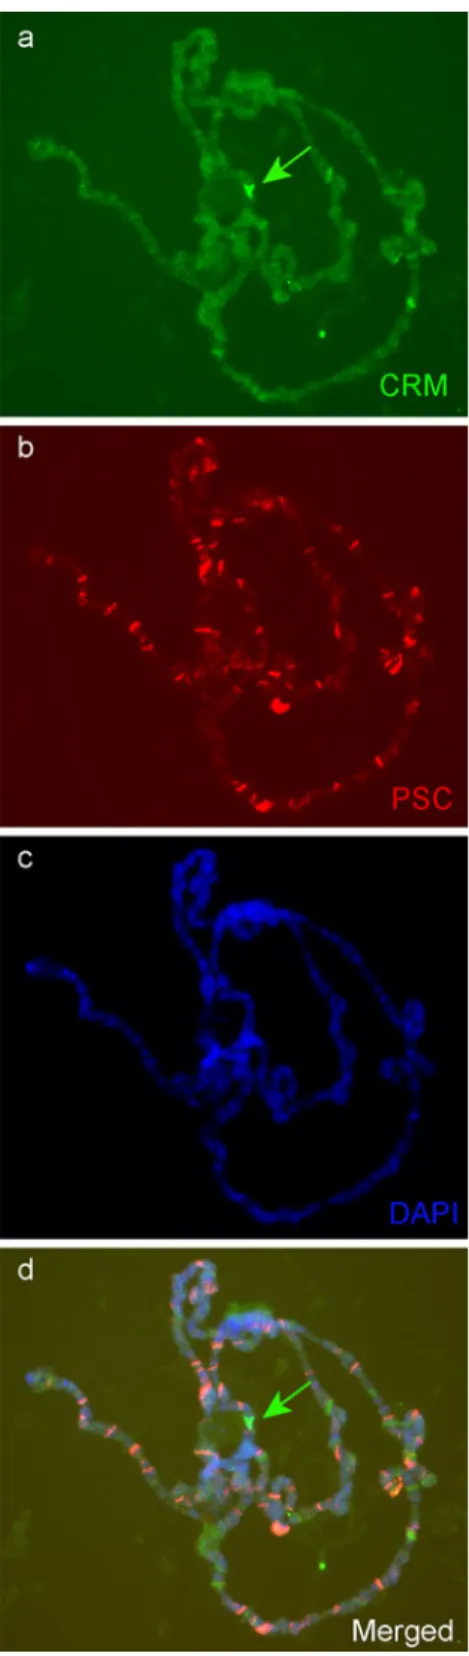 Fig. 9 The Polycomb group protein PSC does not co-localize with CRM on His-C immunostaining of CRM (a, d, green) and PSC (b, d red) on salivary gland polytene chromosomes